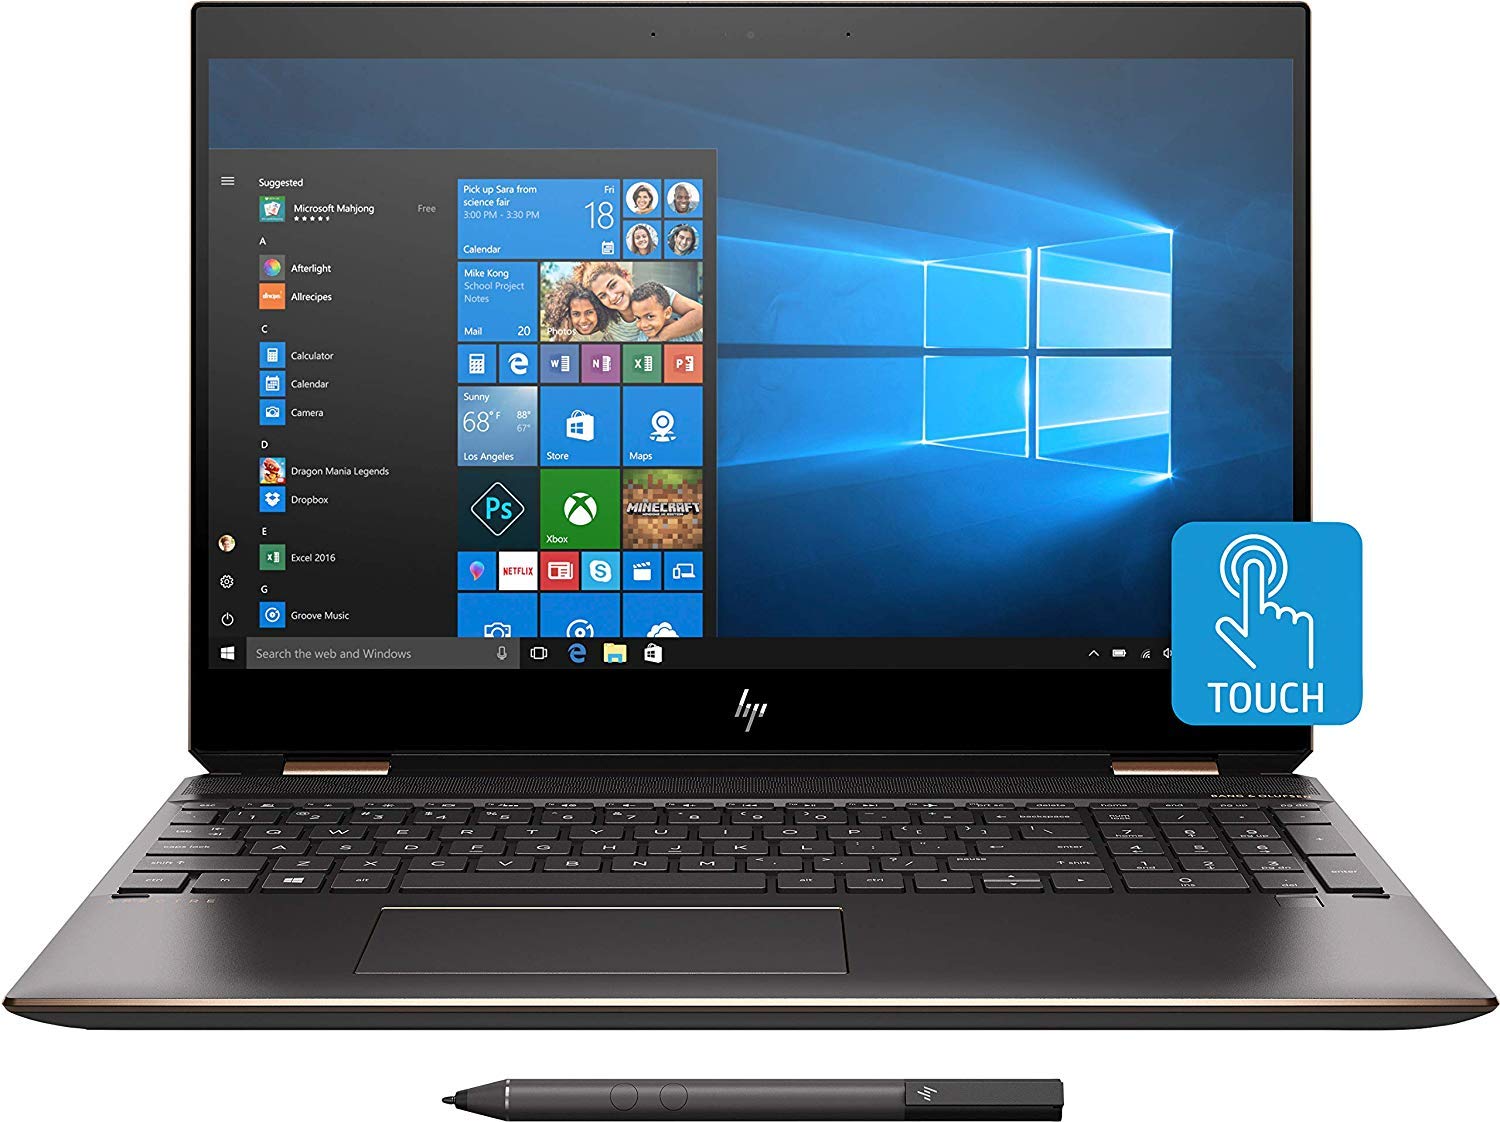 HP Newest Spectre x360 15t Touch AMOLED 10th Gen Intel i7-10510U with Pen, 3 Years McAfee Internet Security, Windows 10 Professional, Warranty, 2-in-1 Laptop PC (16GB, 1TB SSD, Dark Ash)